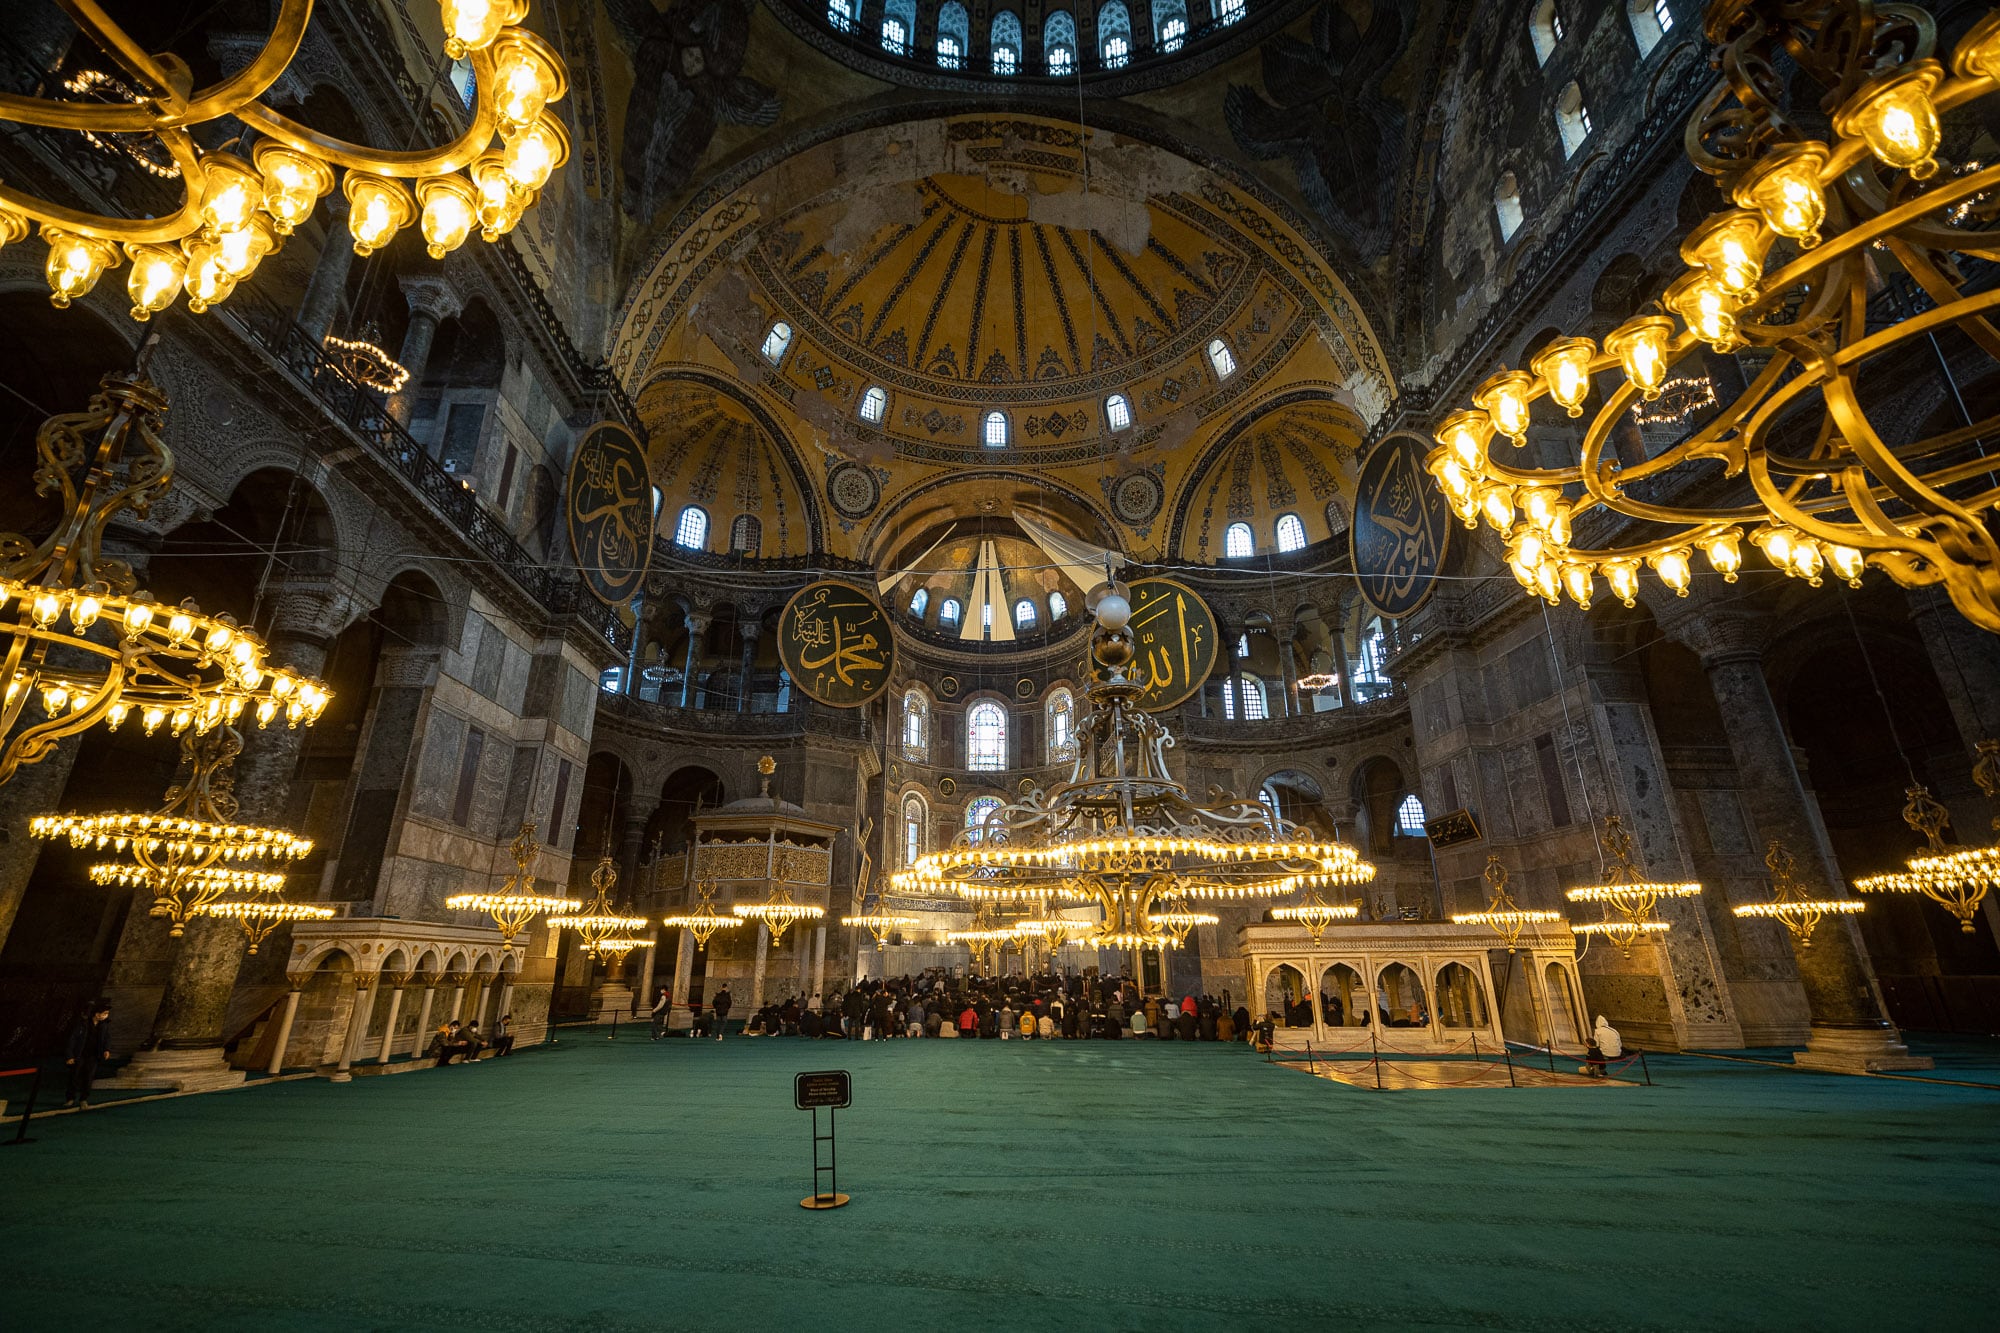 Small group of praying men in the Hagia Sophia